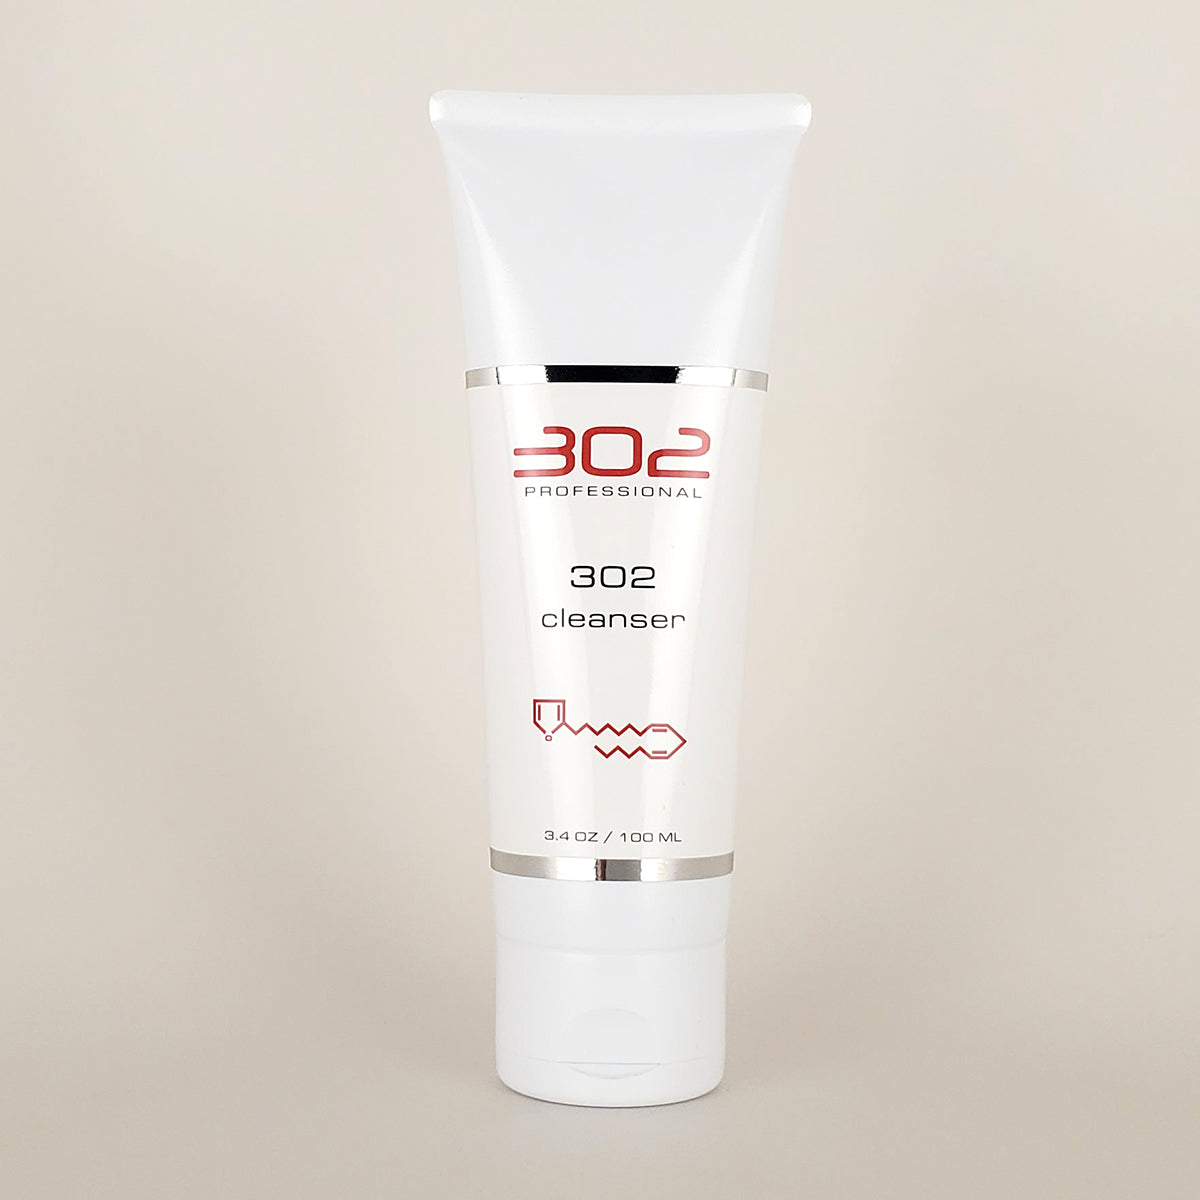 302 Cleanser by 302 Professional Skincare